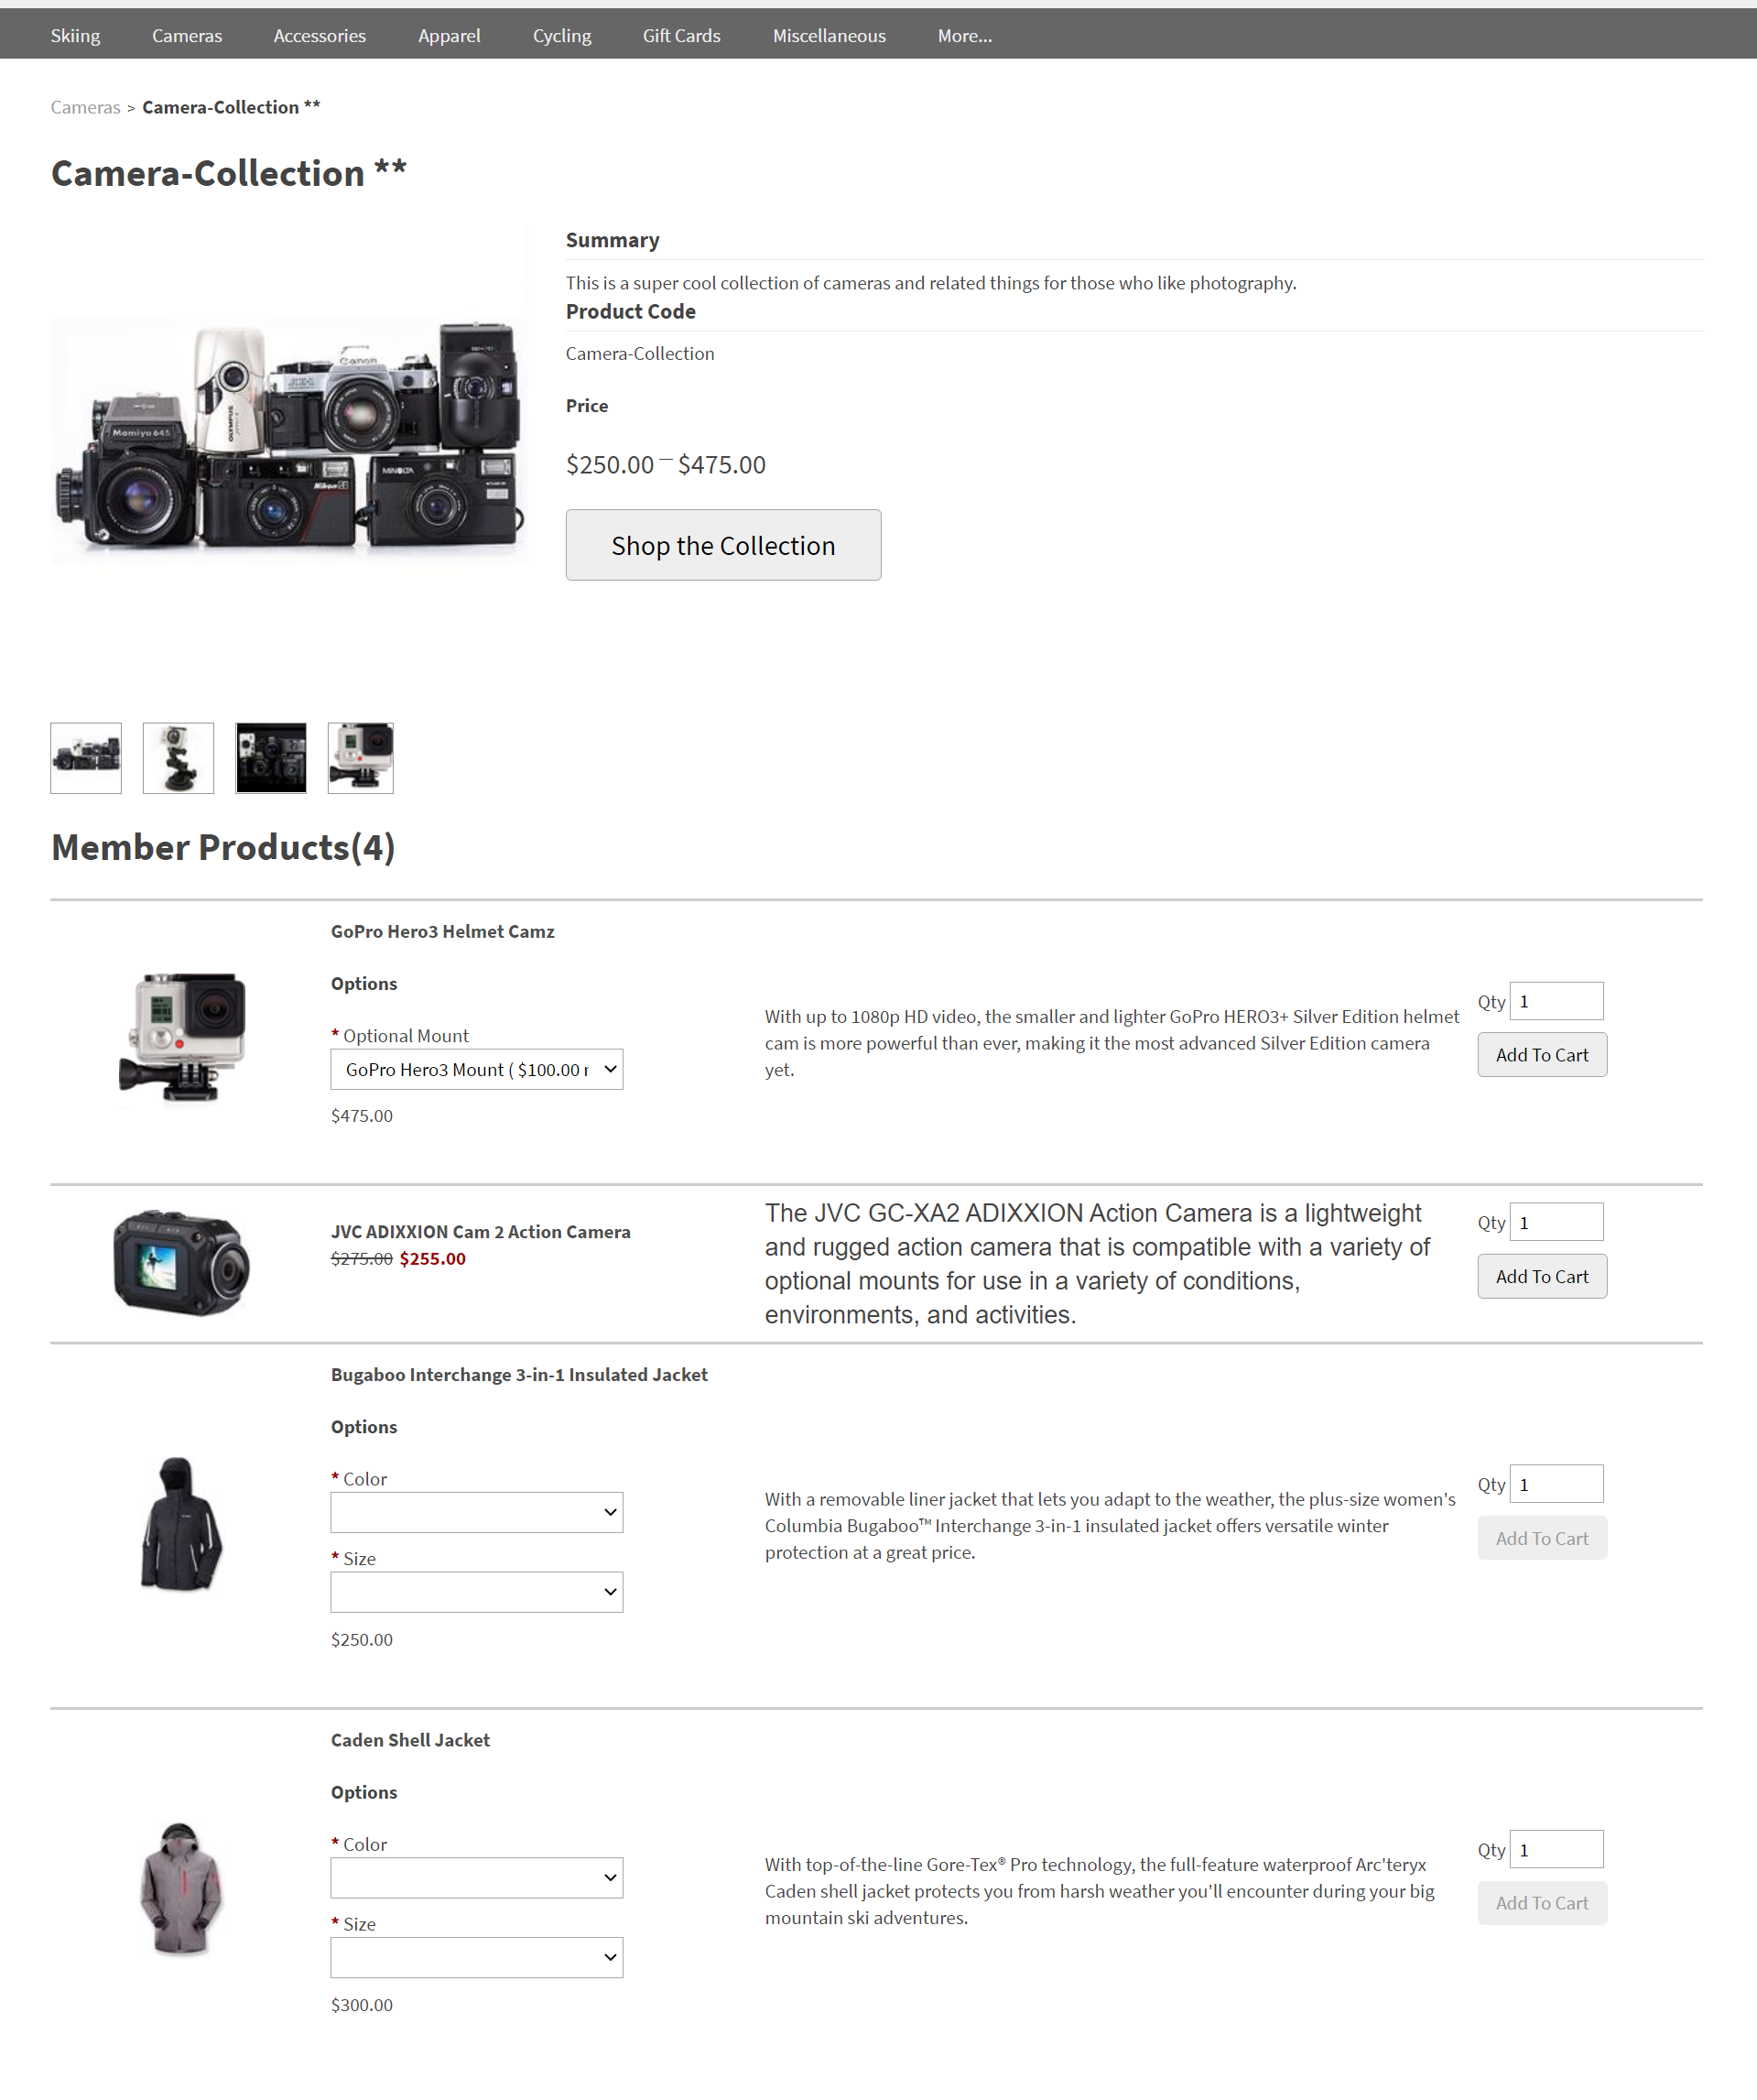 Example of a product page on the storefront showing a list of member products